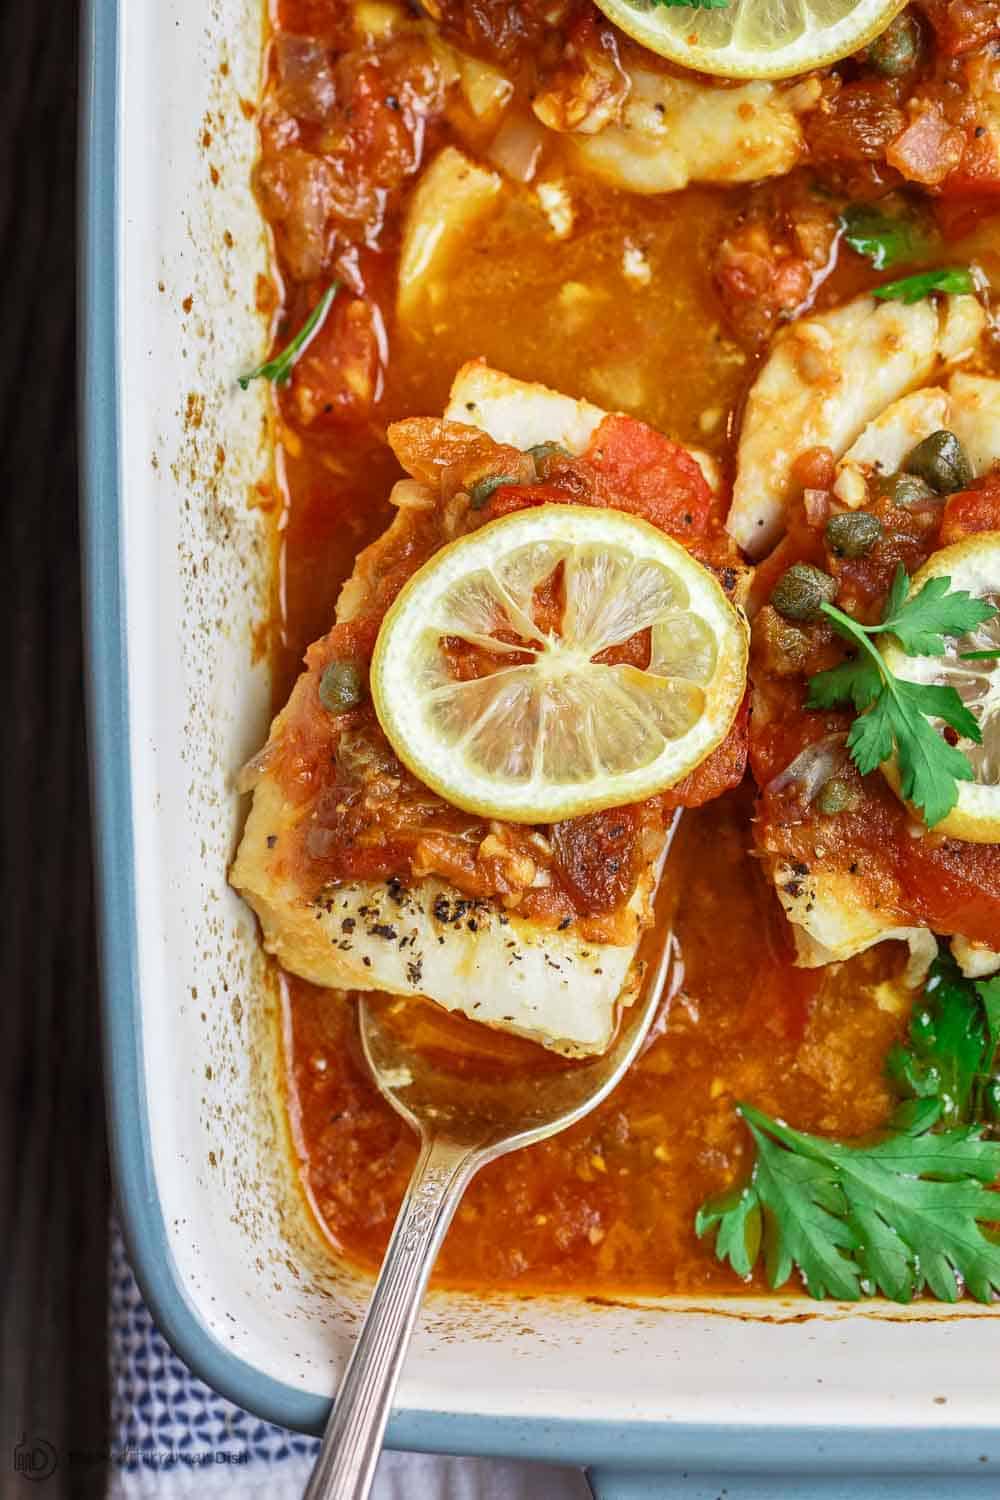 Mediterranean Baked Fish with Tomatoes, Capers and Lemon